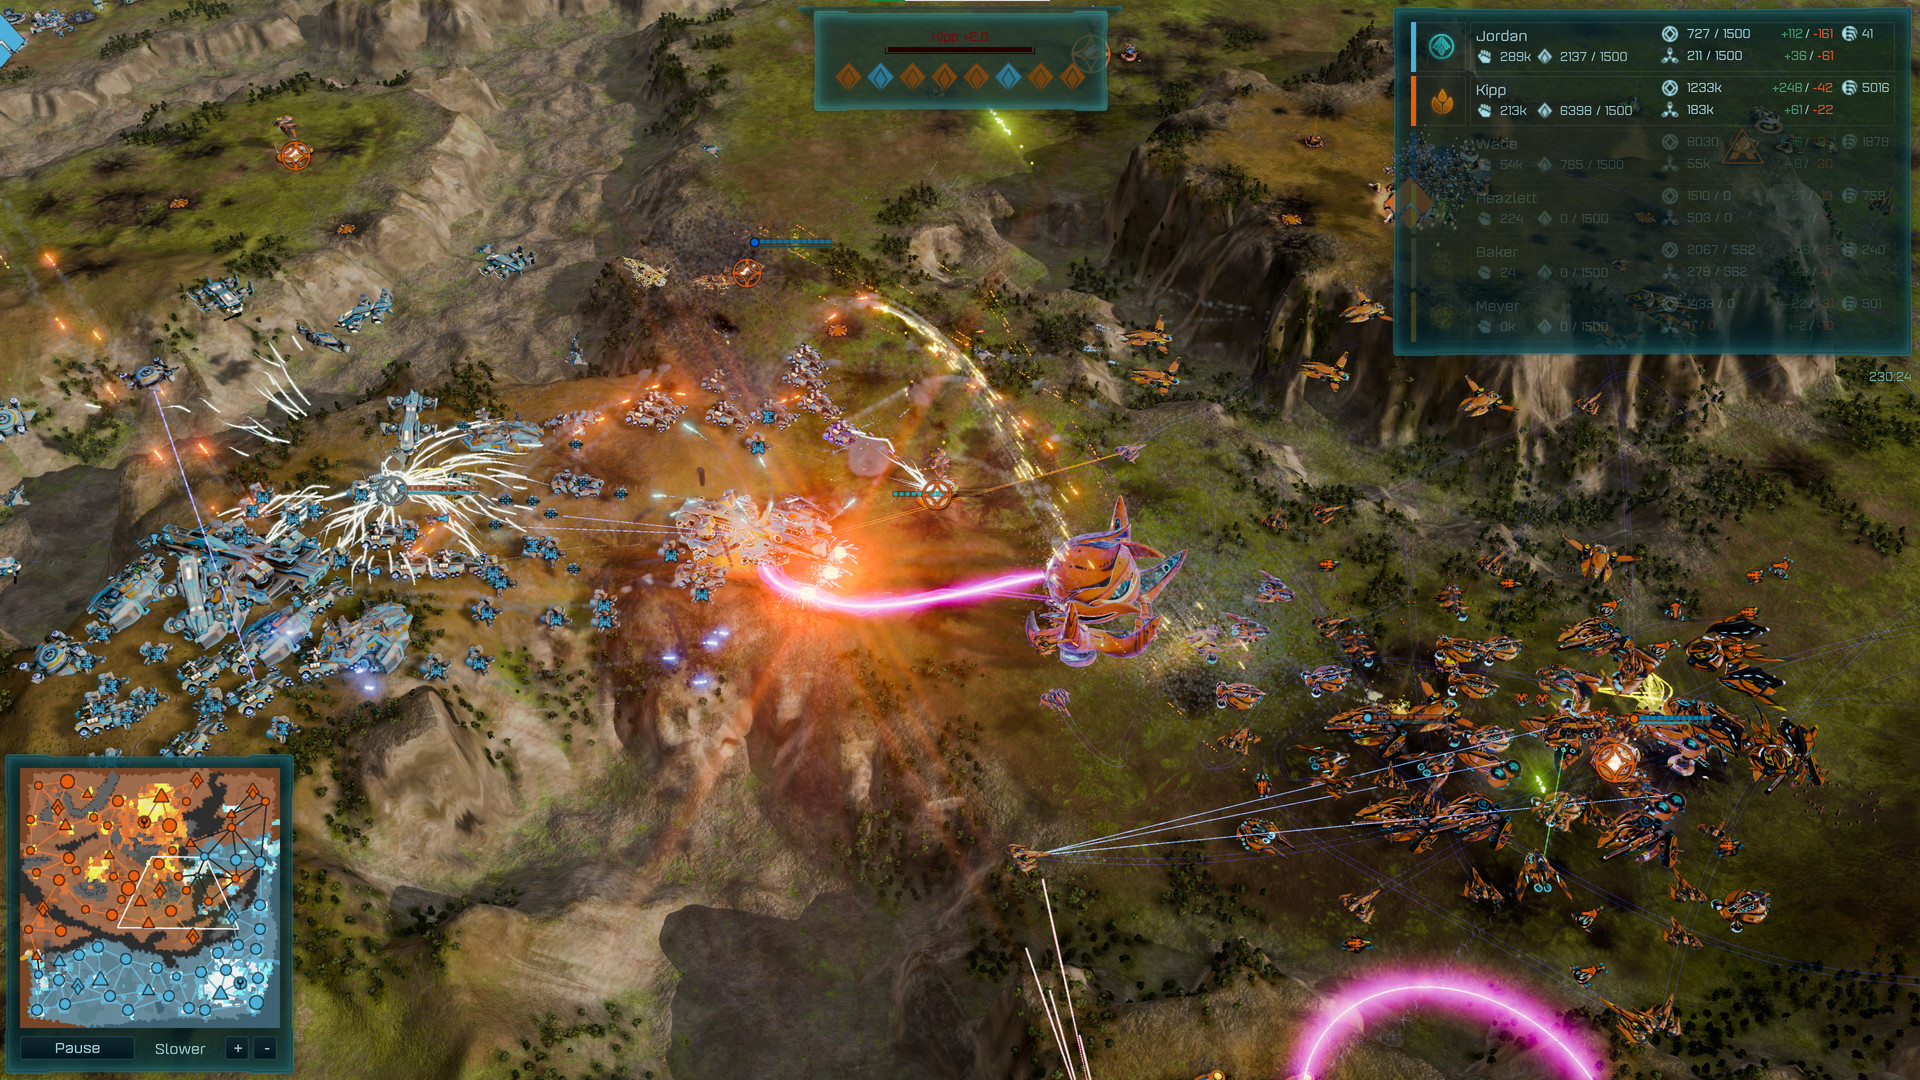 Ashes of the Singularity: Escalation - Core Worlds DLC Steam CD Key, $2.81